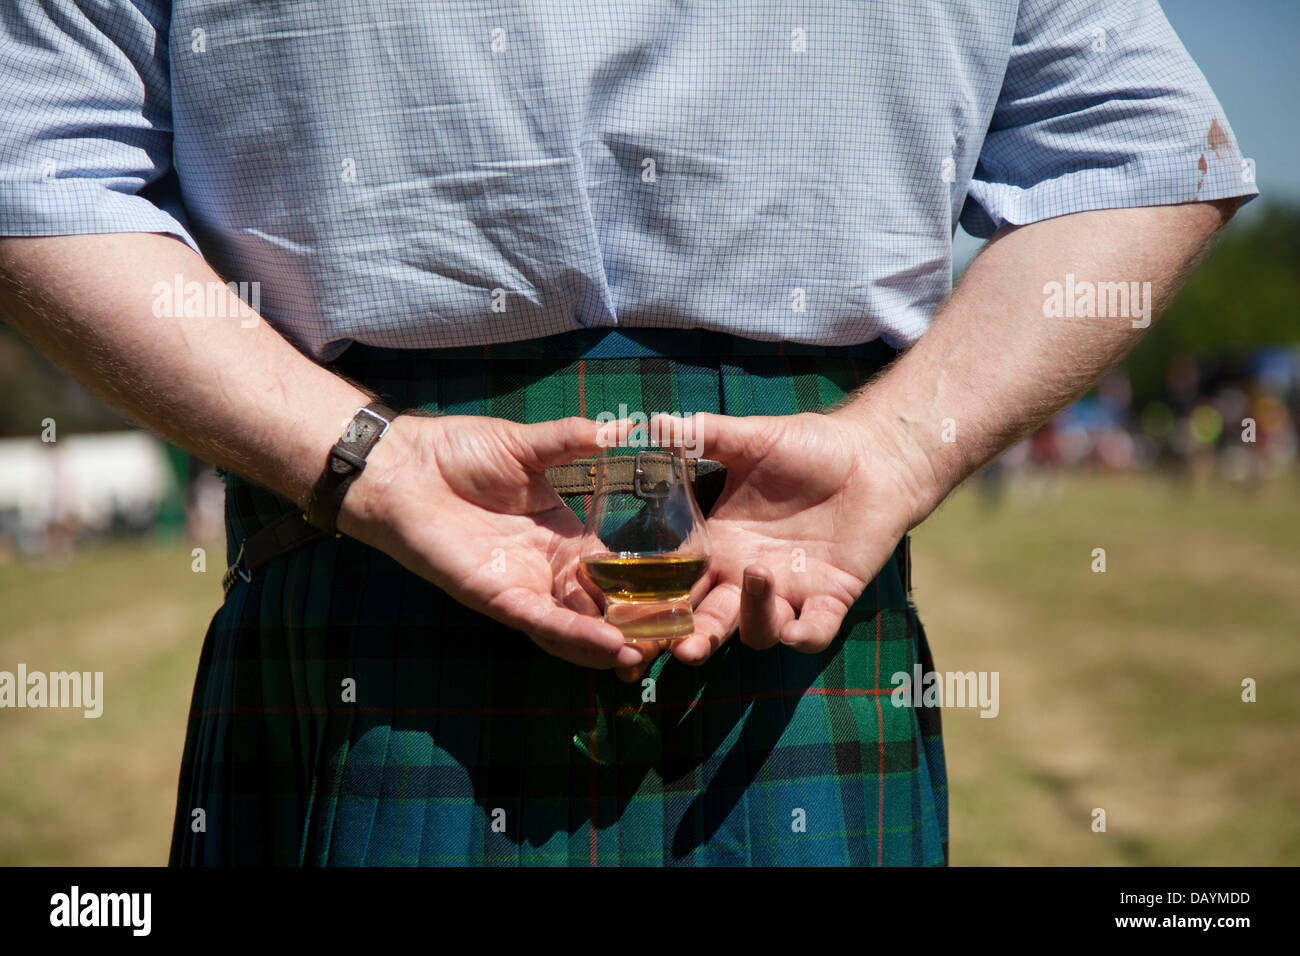 Man glass of Scotch Whisky at Tomintoul, Scotland, UK.  20th July, 2013. The annual Tomintoul Highland games and gathering are held on the 3rd Saturday in July, at the showground in the village.  This sporting, historical and traditional scottish event in the previous years, has been beset with bad weather and has been cancelled on several occasions. Stock Photo